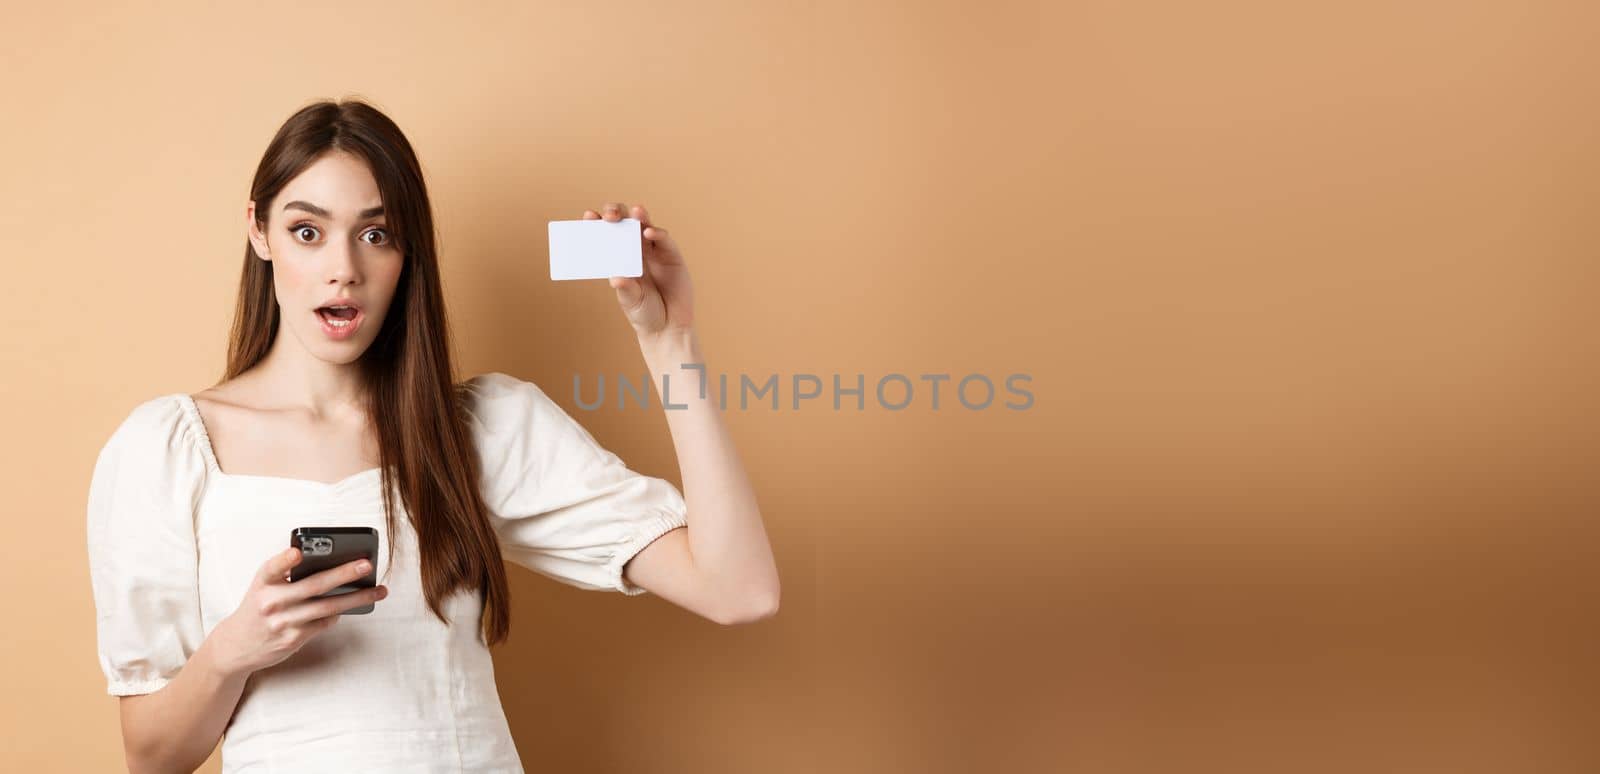 Excited woman showing plastic credit card and using mobile phone app, drop jaw and gasping amazed, checking out bank offer, beige background.